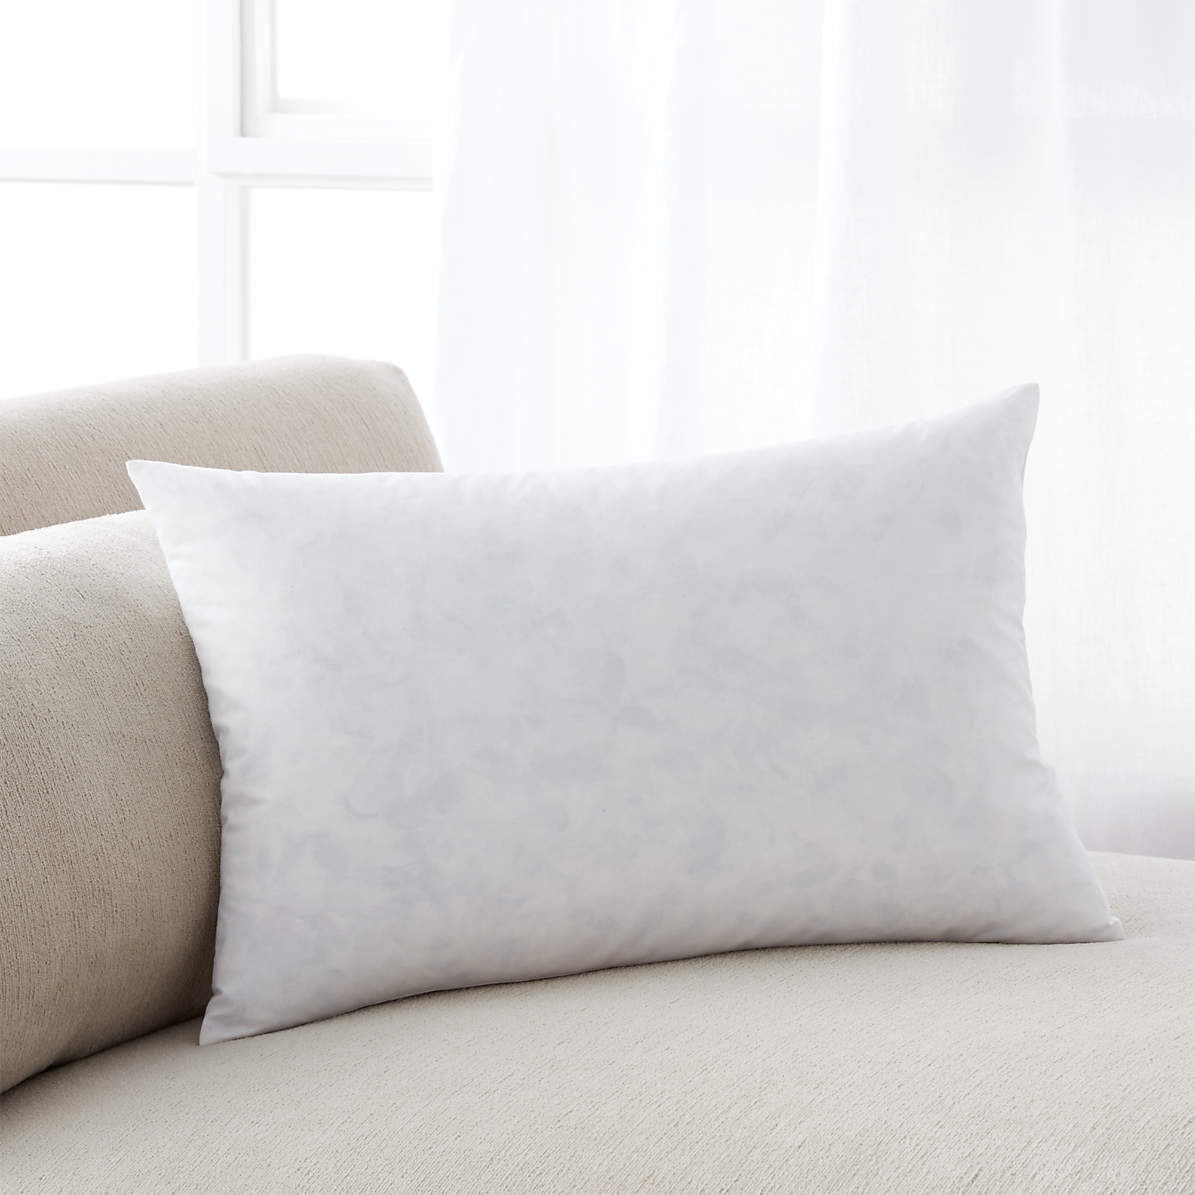 21-inch Square Feather Pillow Insert (Set of 2) - On Sale - Bed